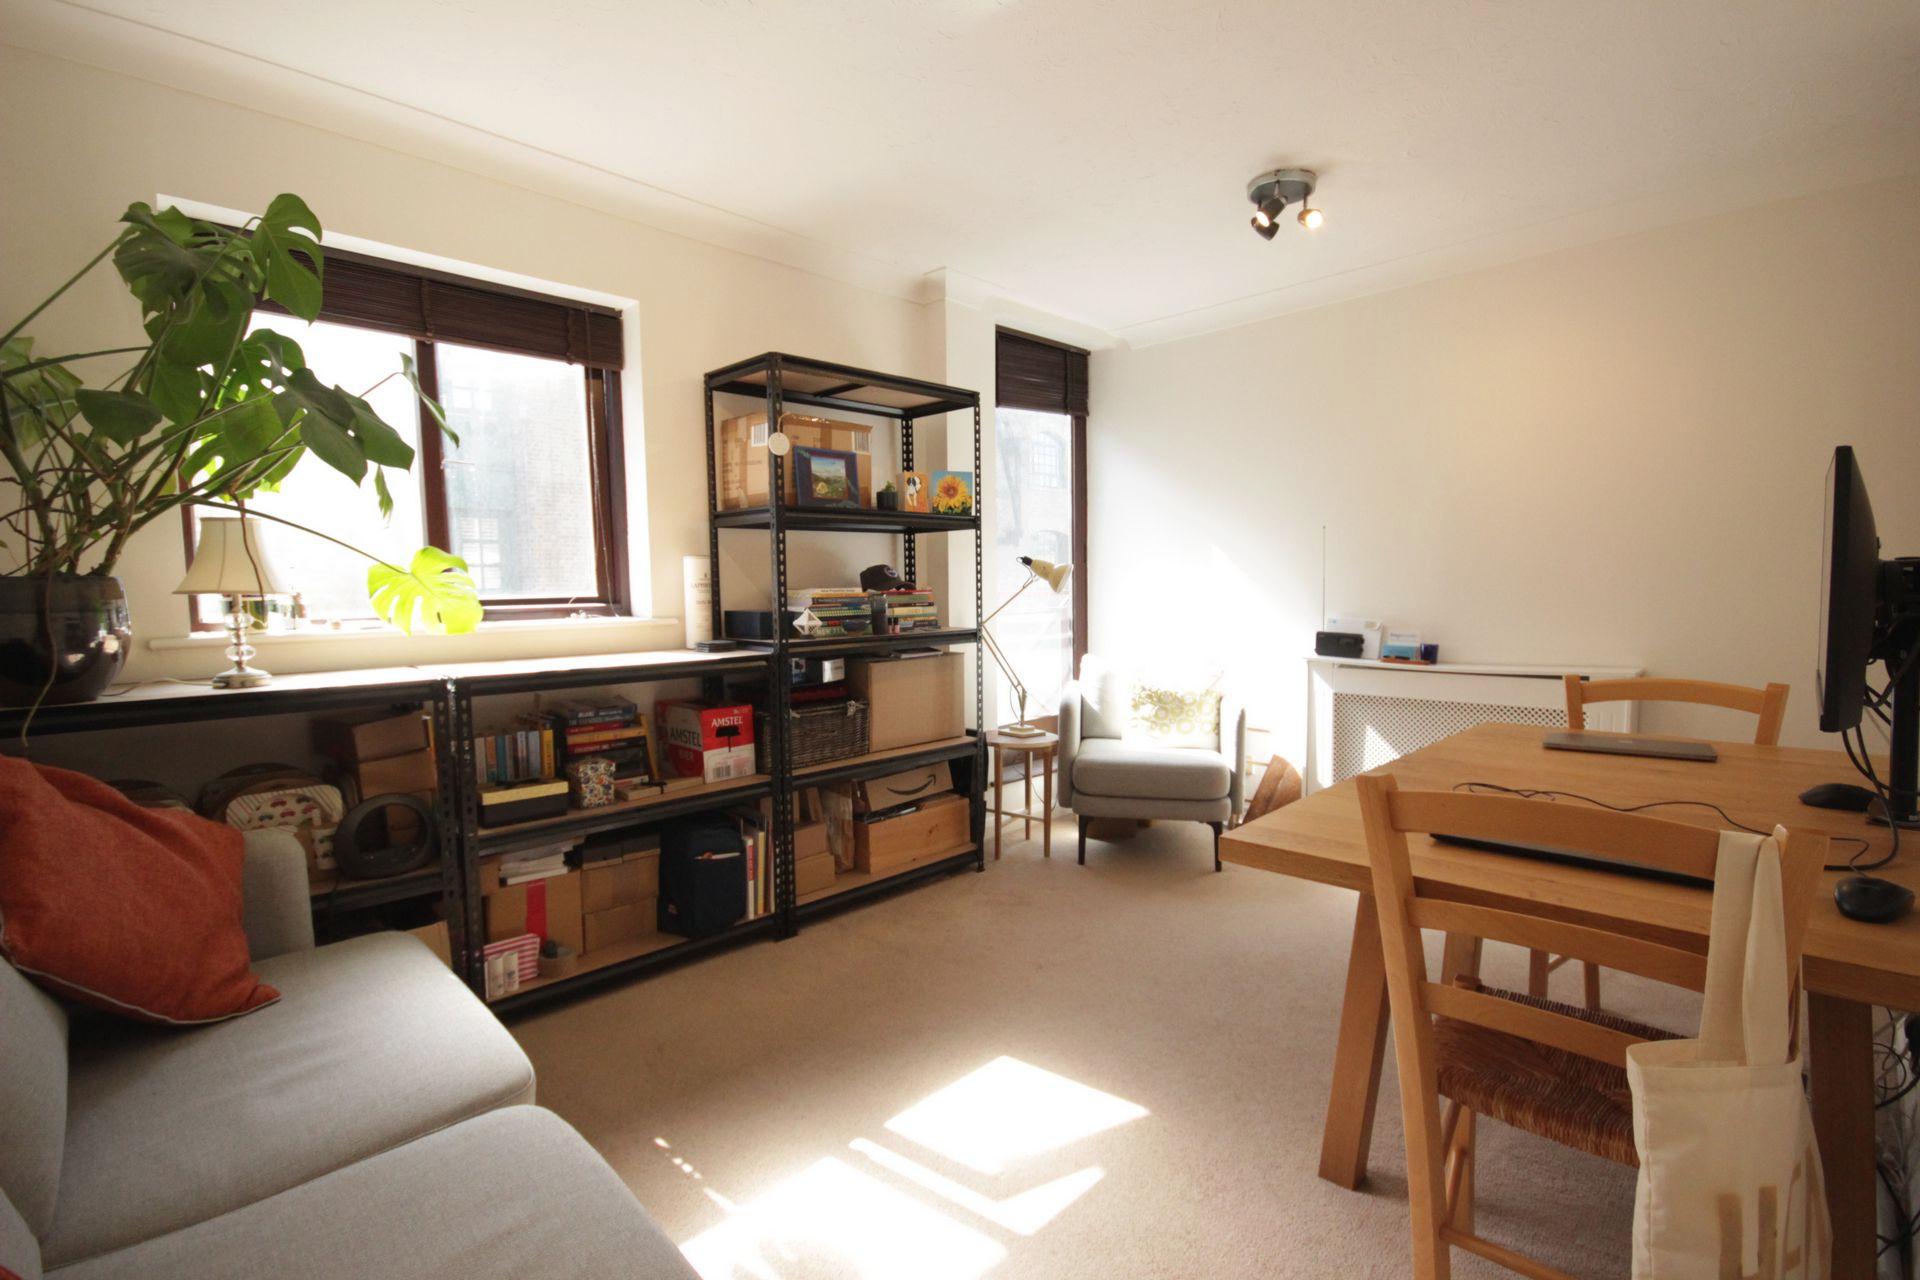 1 Bedroom Apartment to rent in Wapping, London, E1W